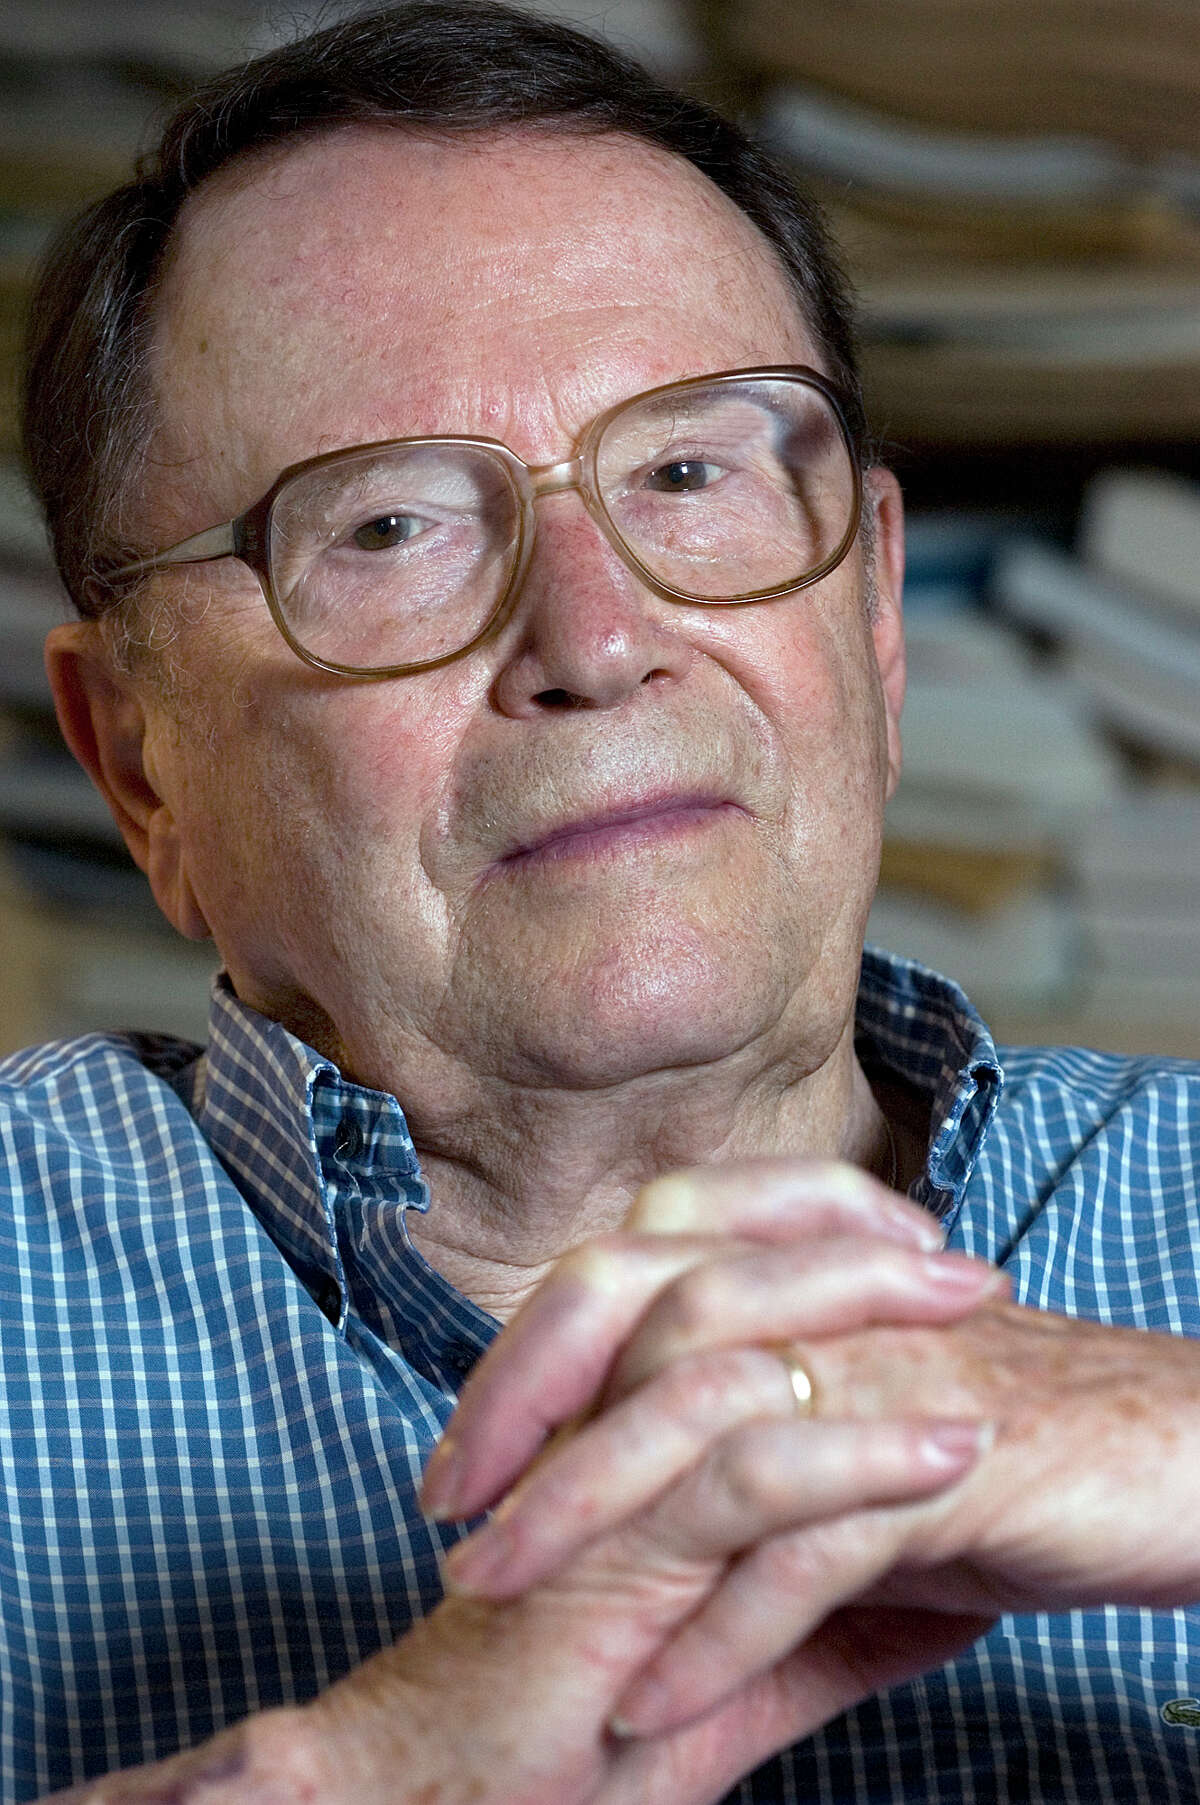 FILE- In this July 18, 2006, file photo, poet Richard Wilbur, a Pulitzer Prize winner and former poet laureate, poses for a photo at his home in Cummington, Mass. Wilbur, the Pulitzer Prize-winning poet and translator who intrigued and delighted generations of readers and theatergoers through his rhyming editions of Moliere and his own verse on memory, writing and nature, died. He was 96. Wilbur died Saturday, Oct. 14, 2017, night in Belmont, Mass., with his family by his side, according to friend and fellow poet, Dana Gioia. (AP Photo/Nancy Palmieri, File)